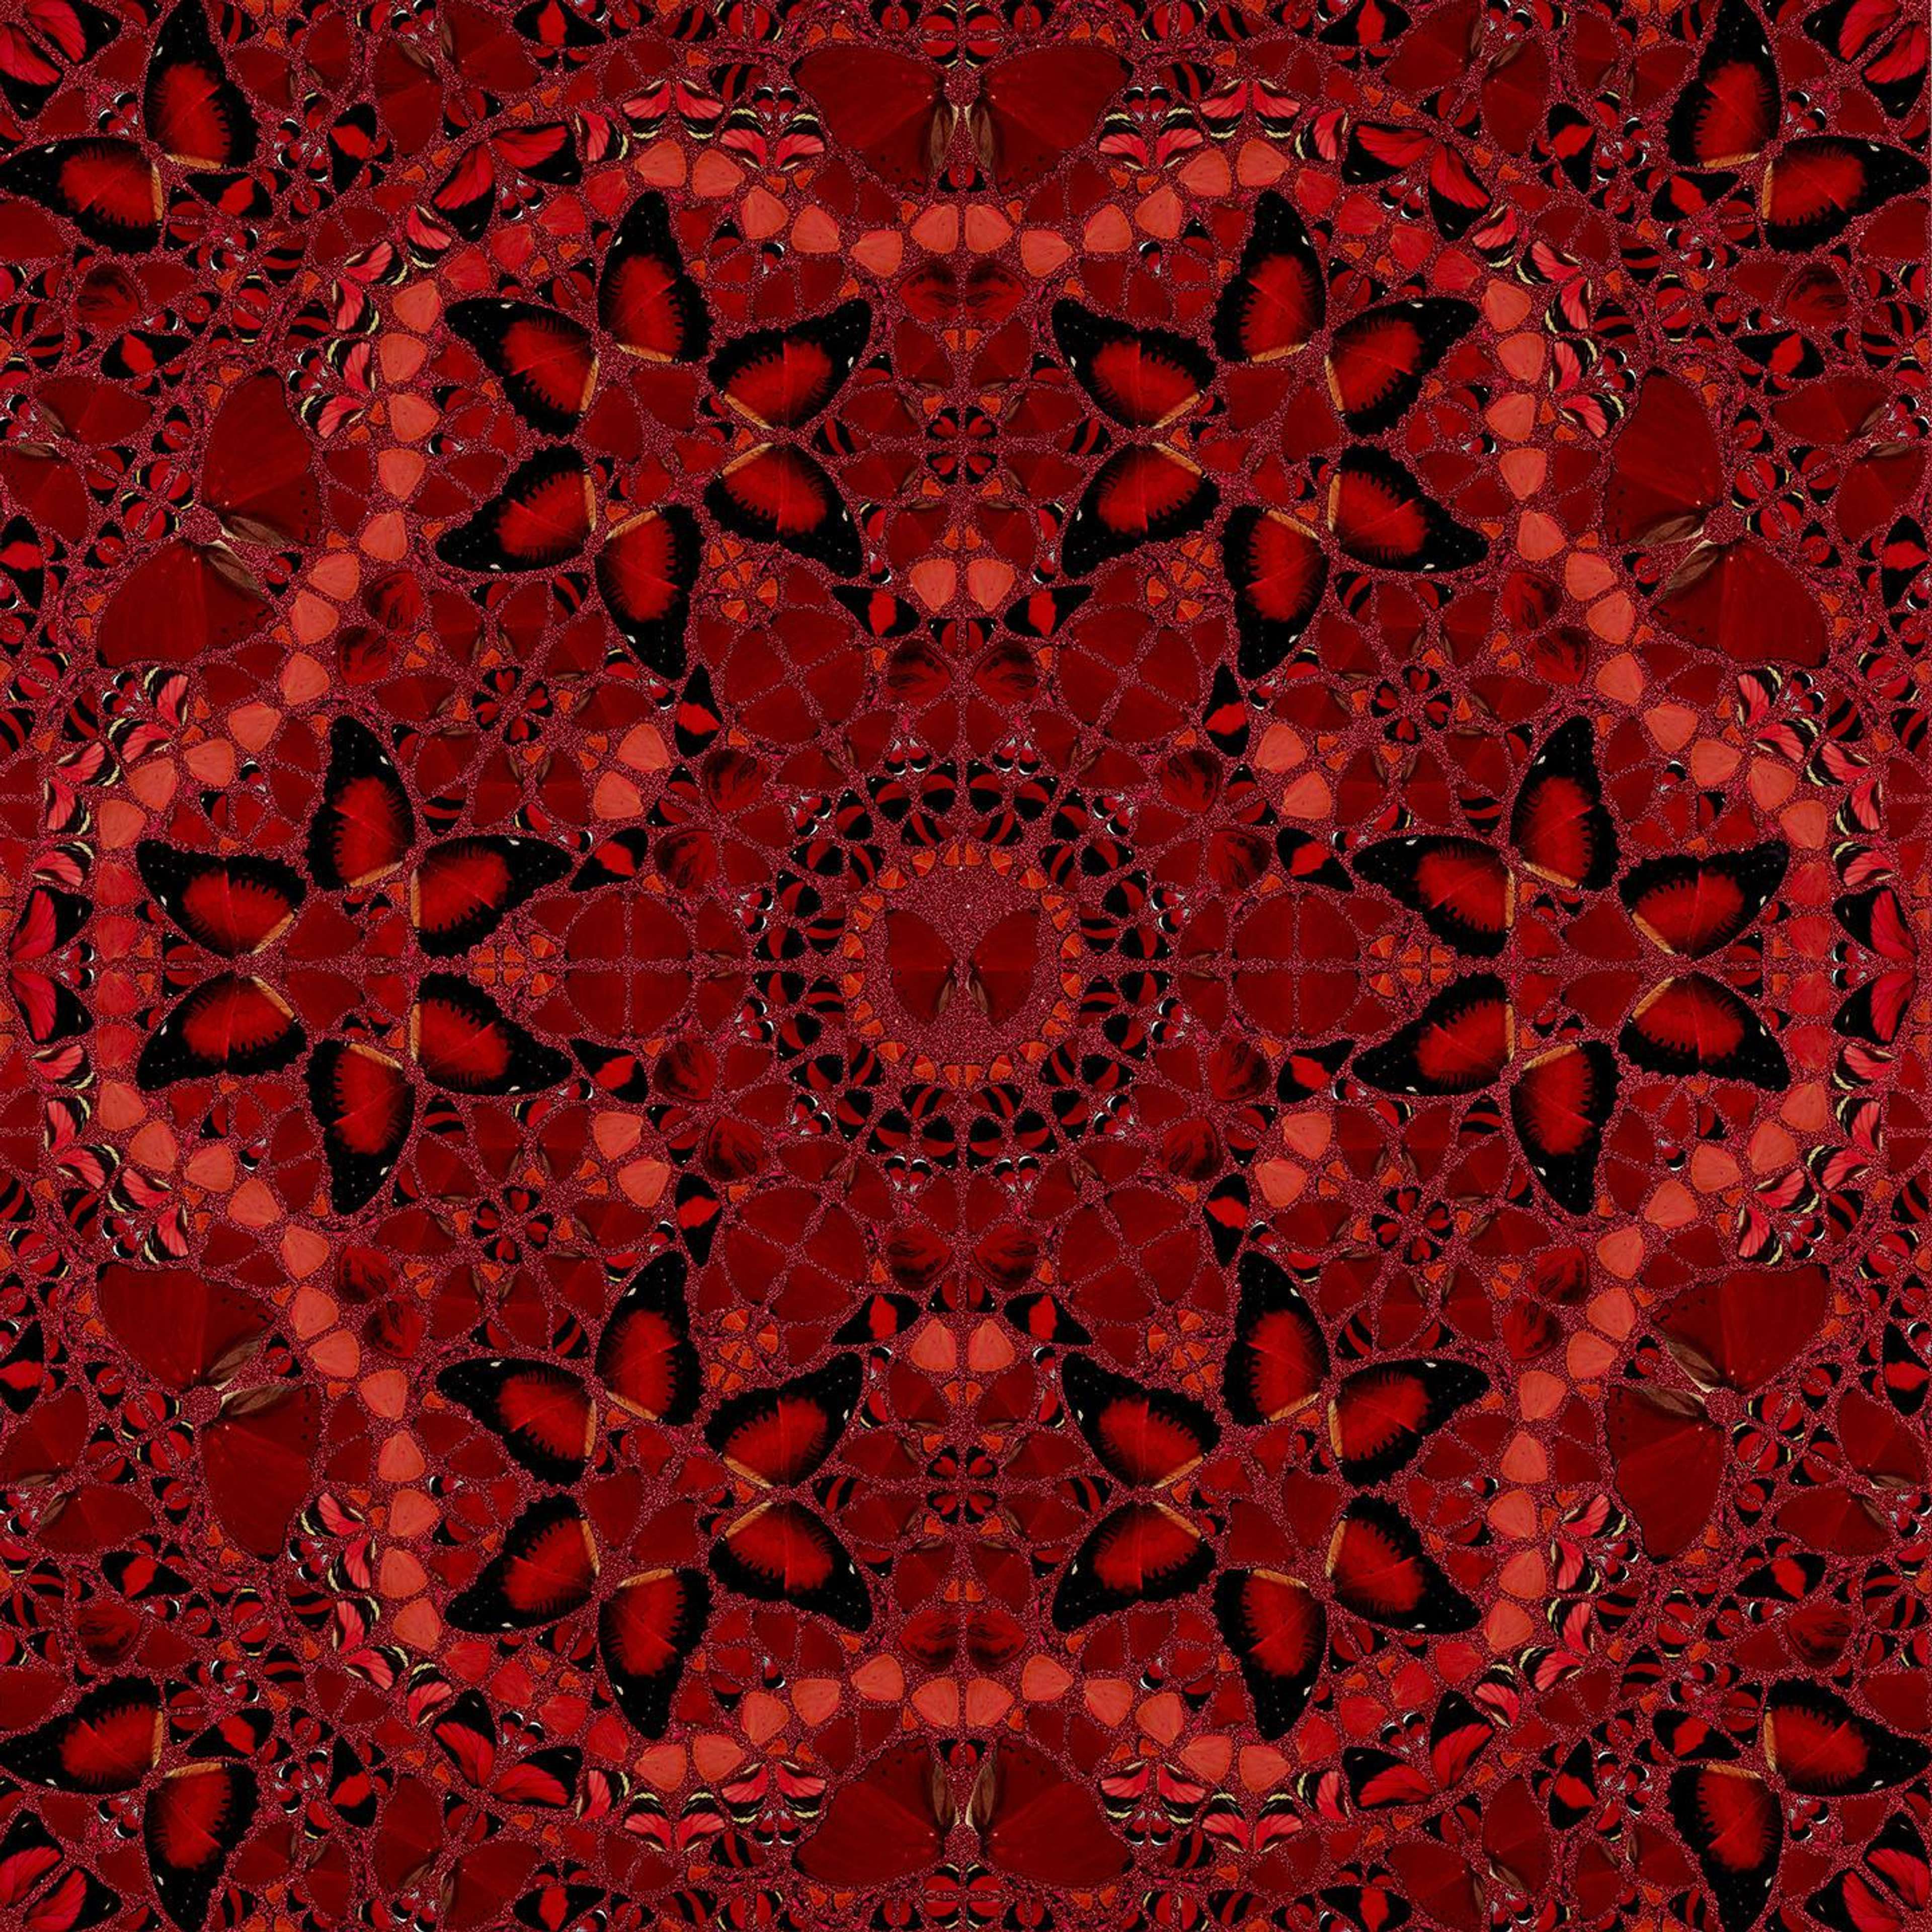 This print shows a captivating pattern composed of butterflies. The composition is dominated by a bold red which is accompanied by other red tones and black detailing. The warm print exudes energy and dynamism and the hexagonal pattern which emanates from the centre of the print seizes the viewer’s attention.